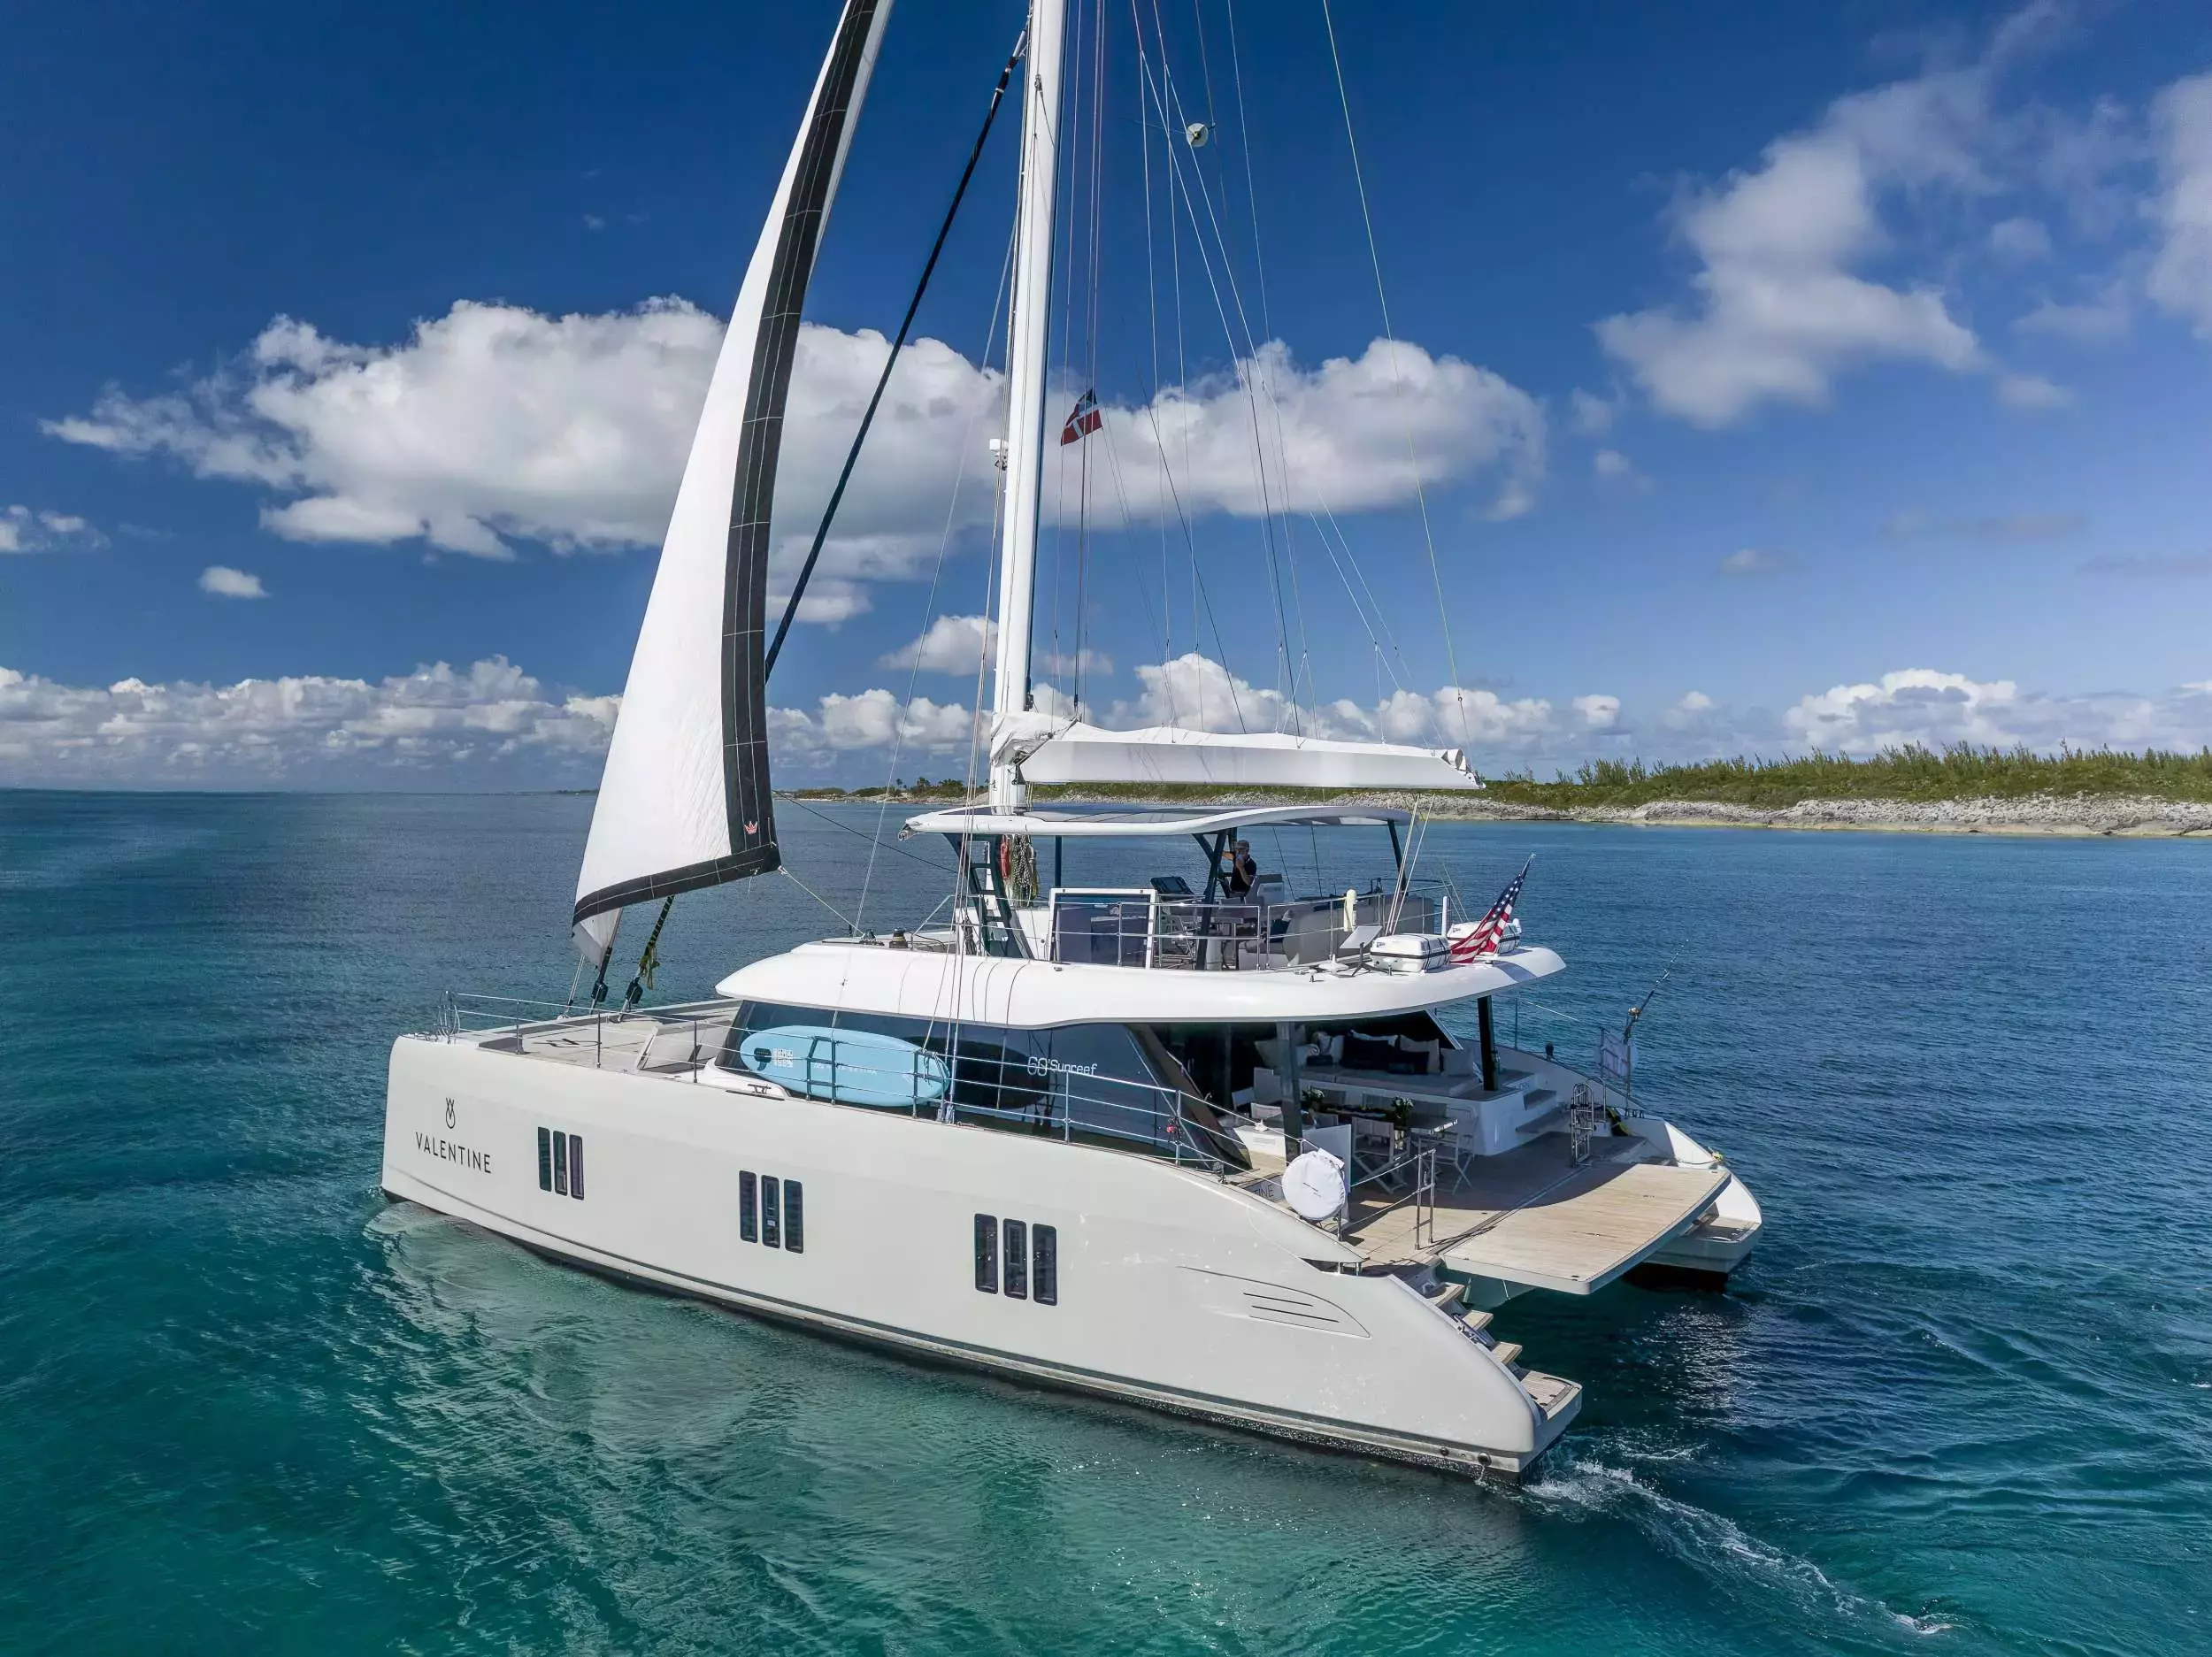 Valentine by Sunreef Yachts - Special Offer for a private Power Catamaran Charter in St Thomas with a crew